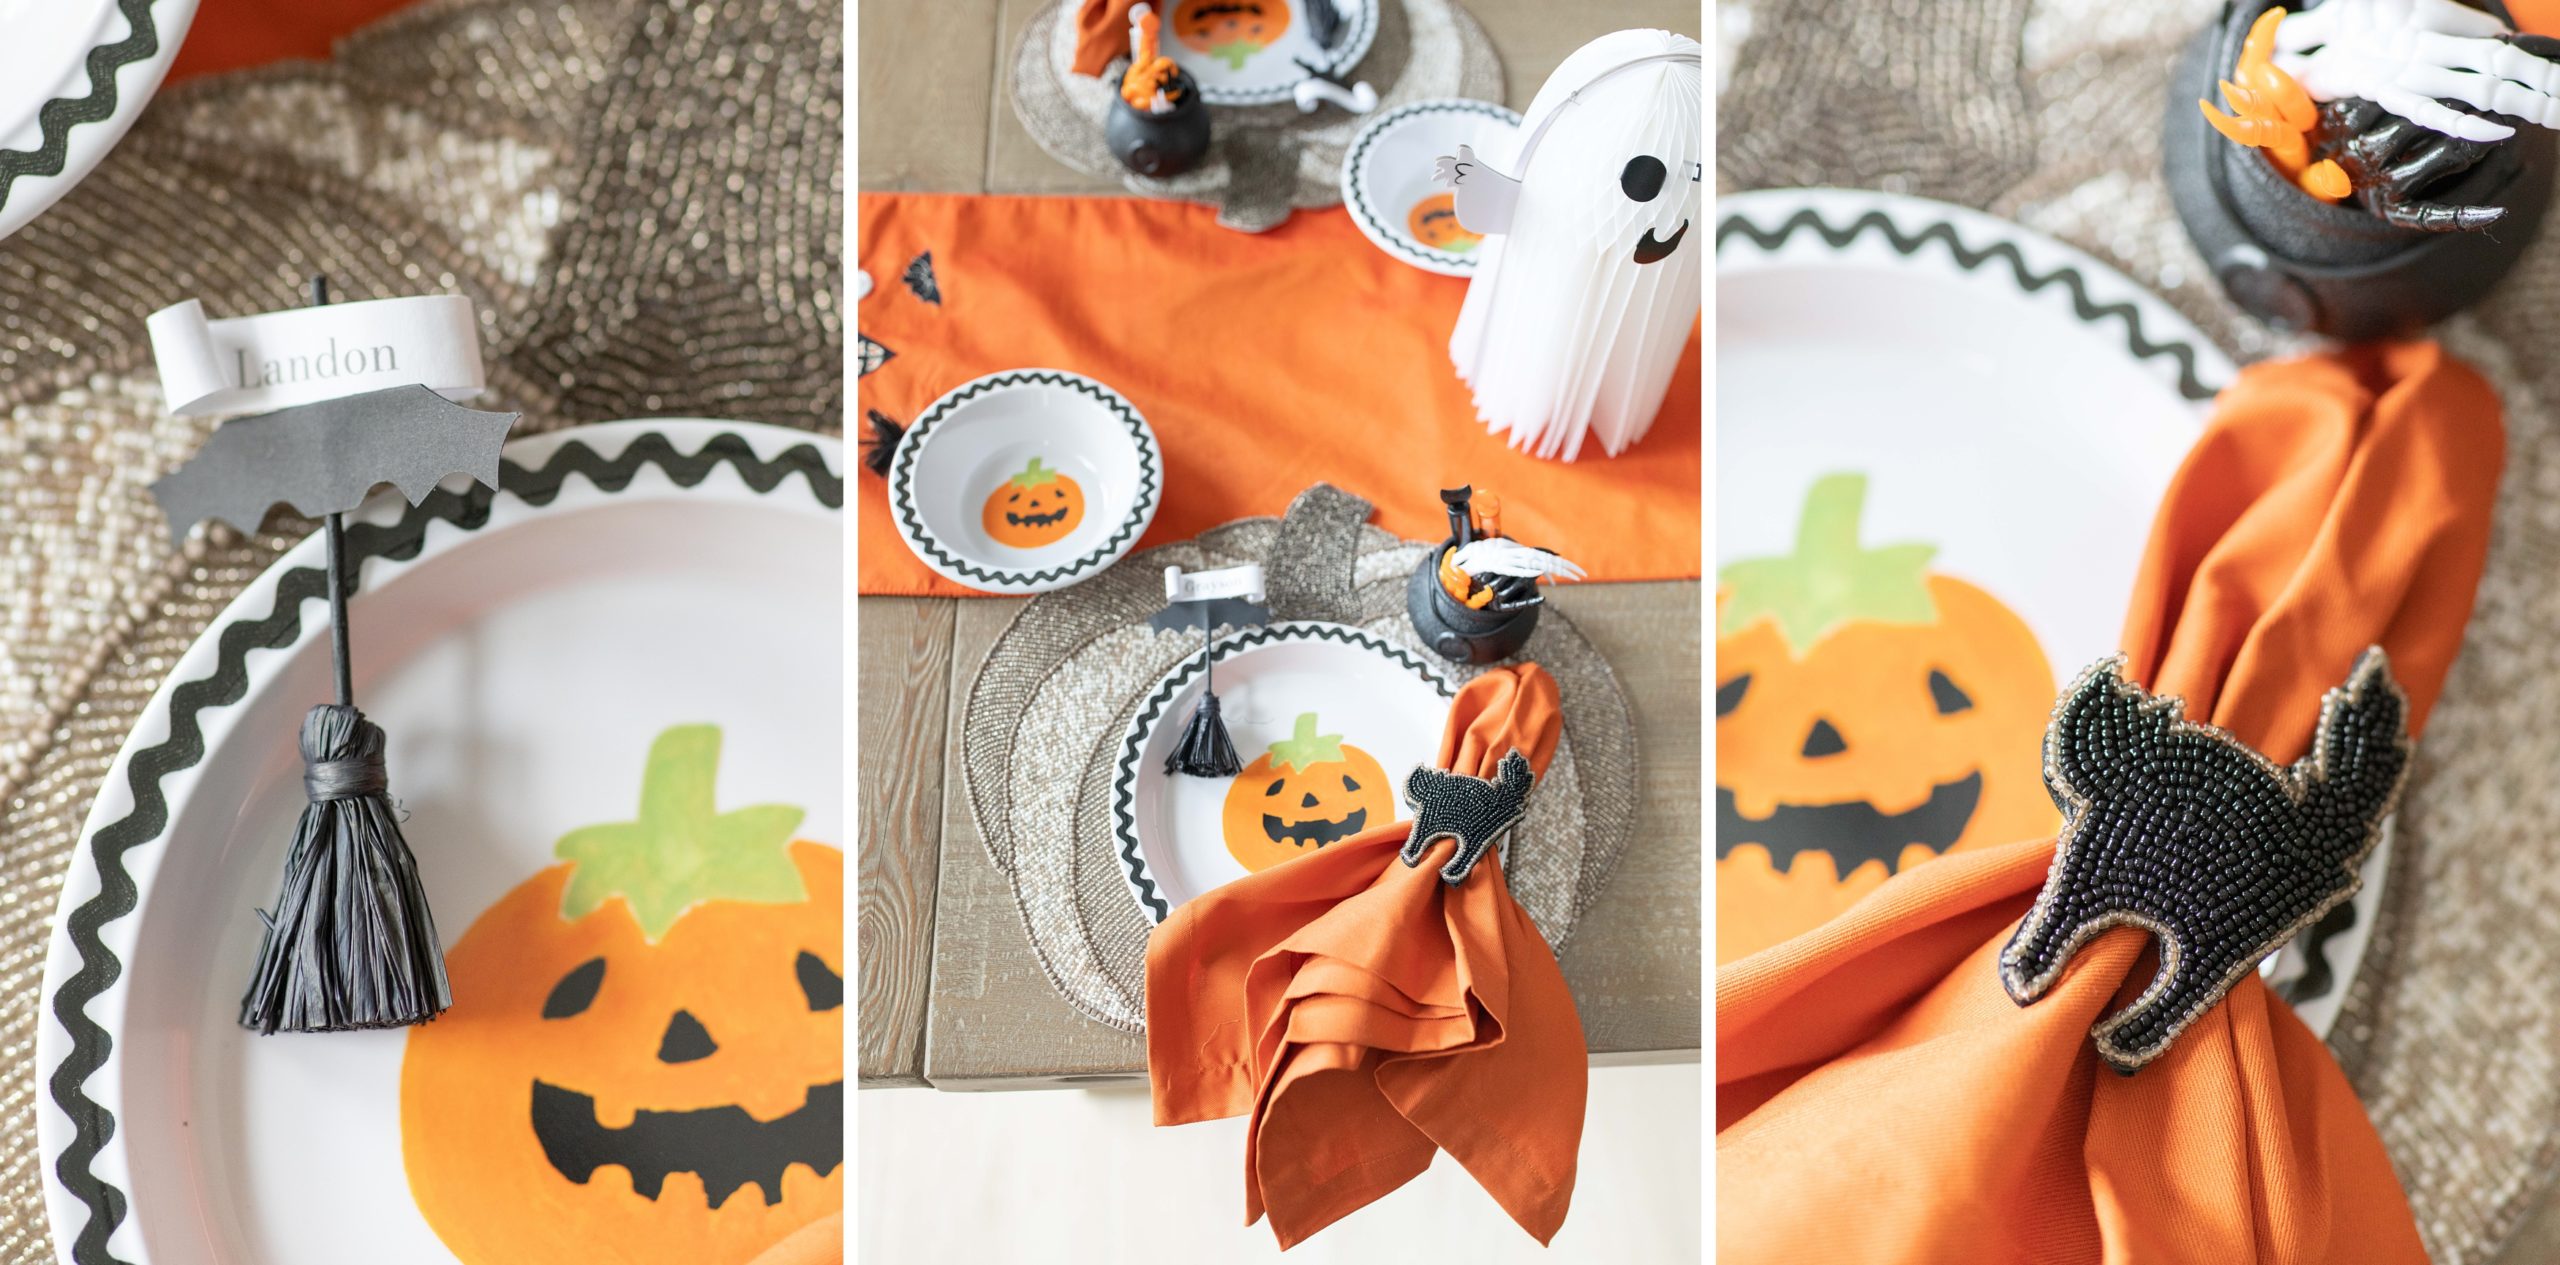 A fun Halloween party for ideas for both kids and adults! Includes a Halloween can toss, eyeball dig, costume contest and more!